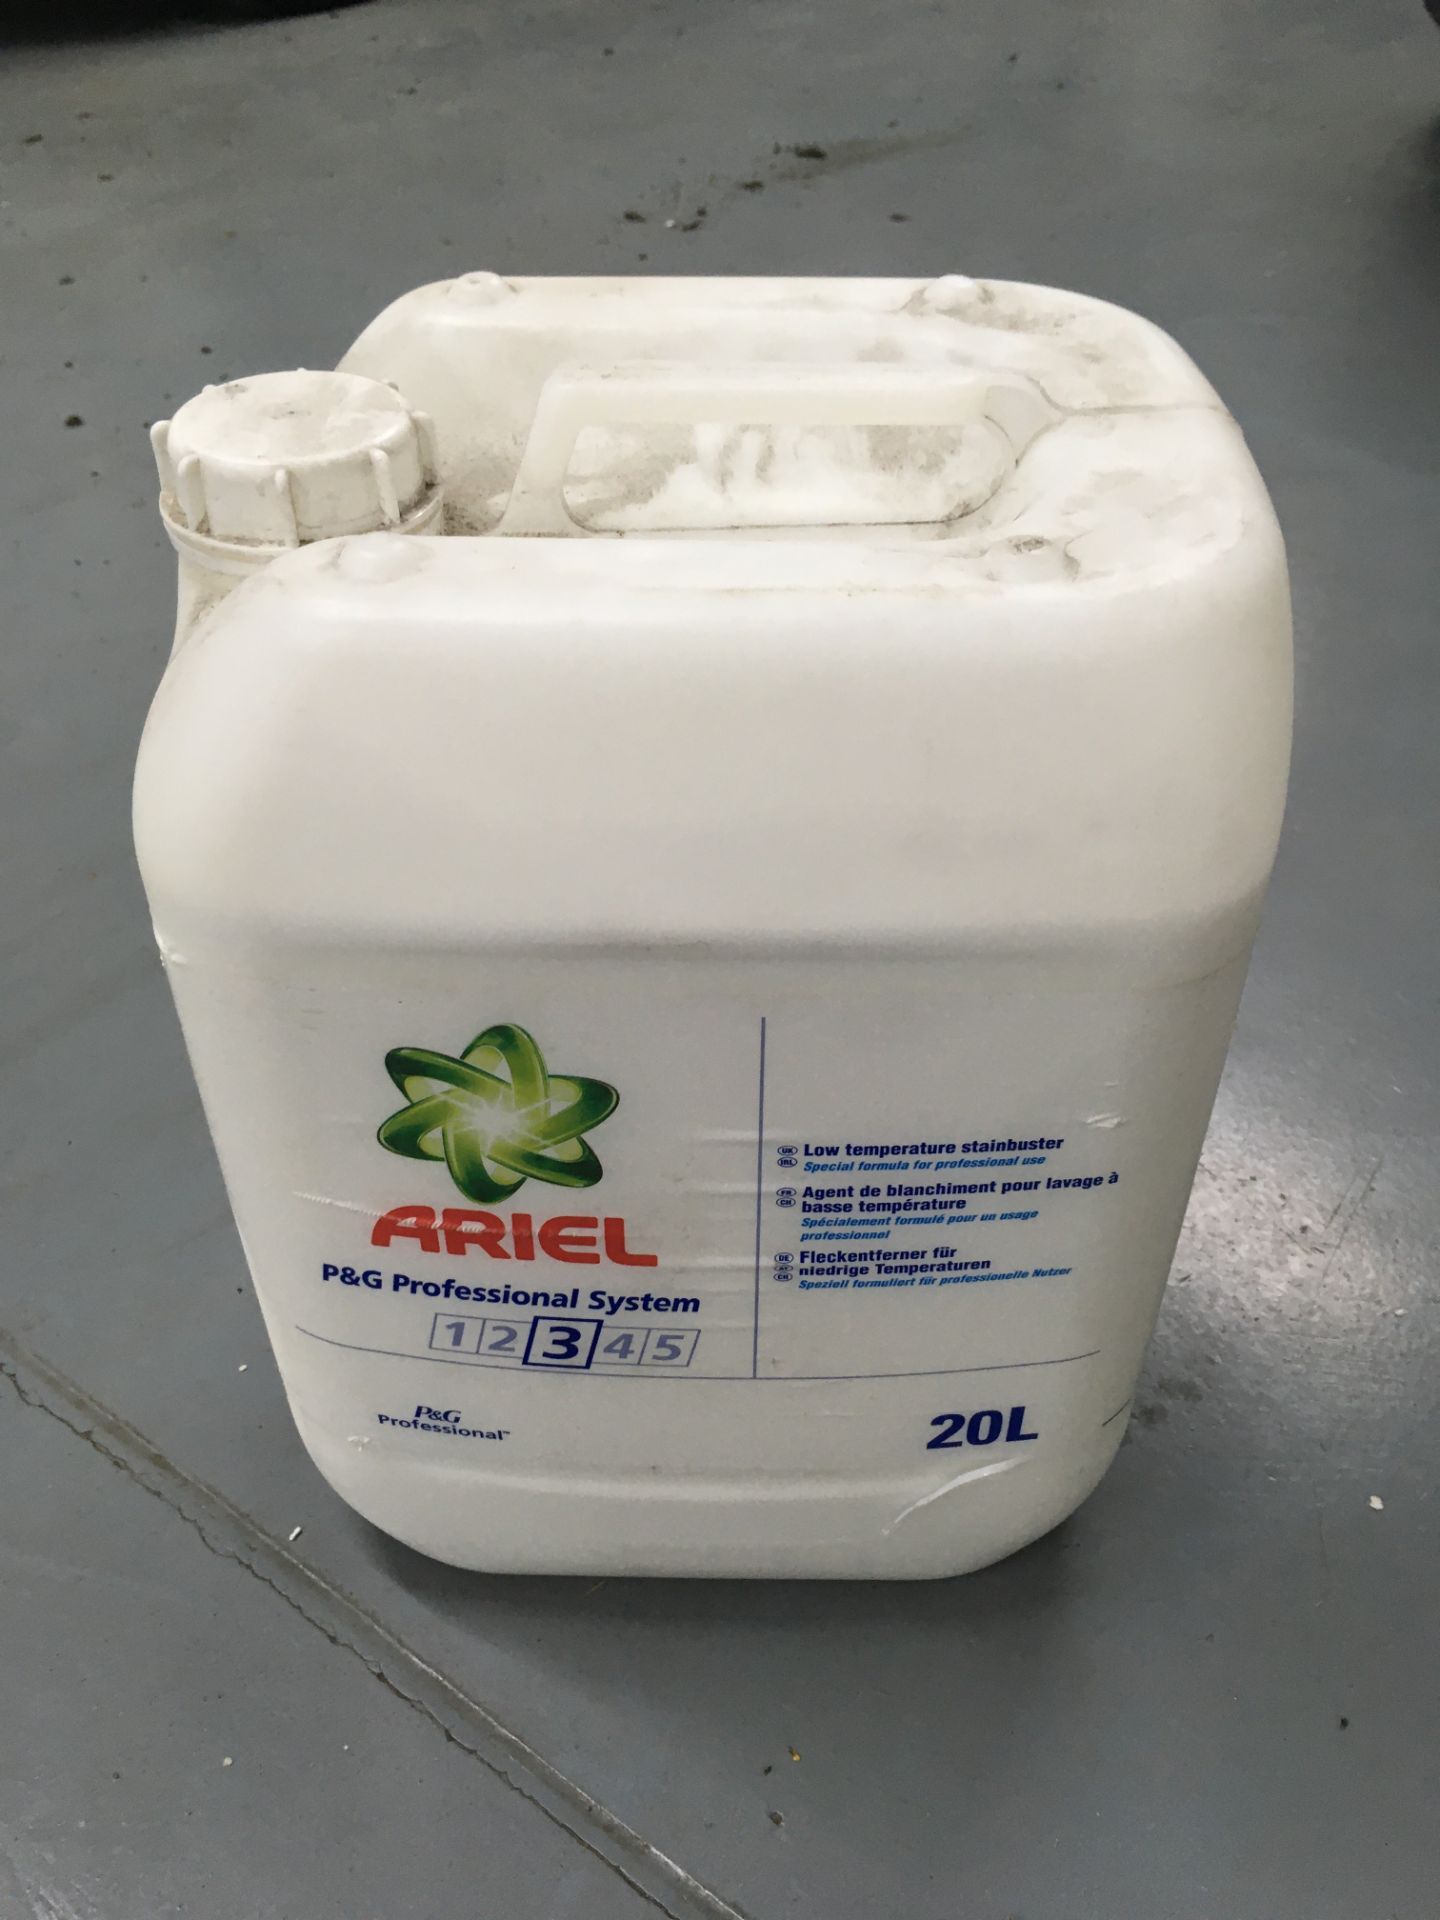 22 x Aerial Professional Stain Buster (20l) - Image 2 of 5